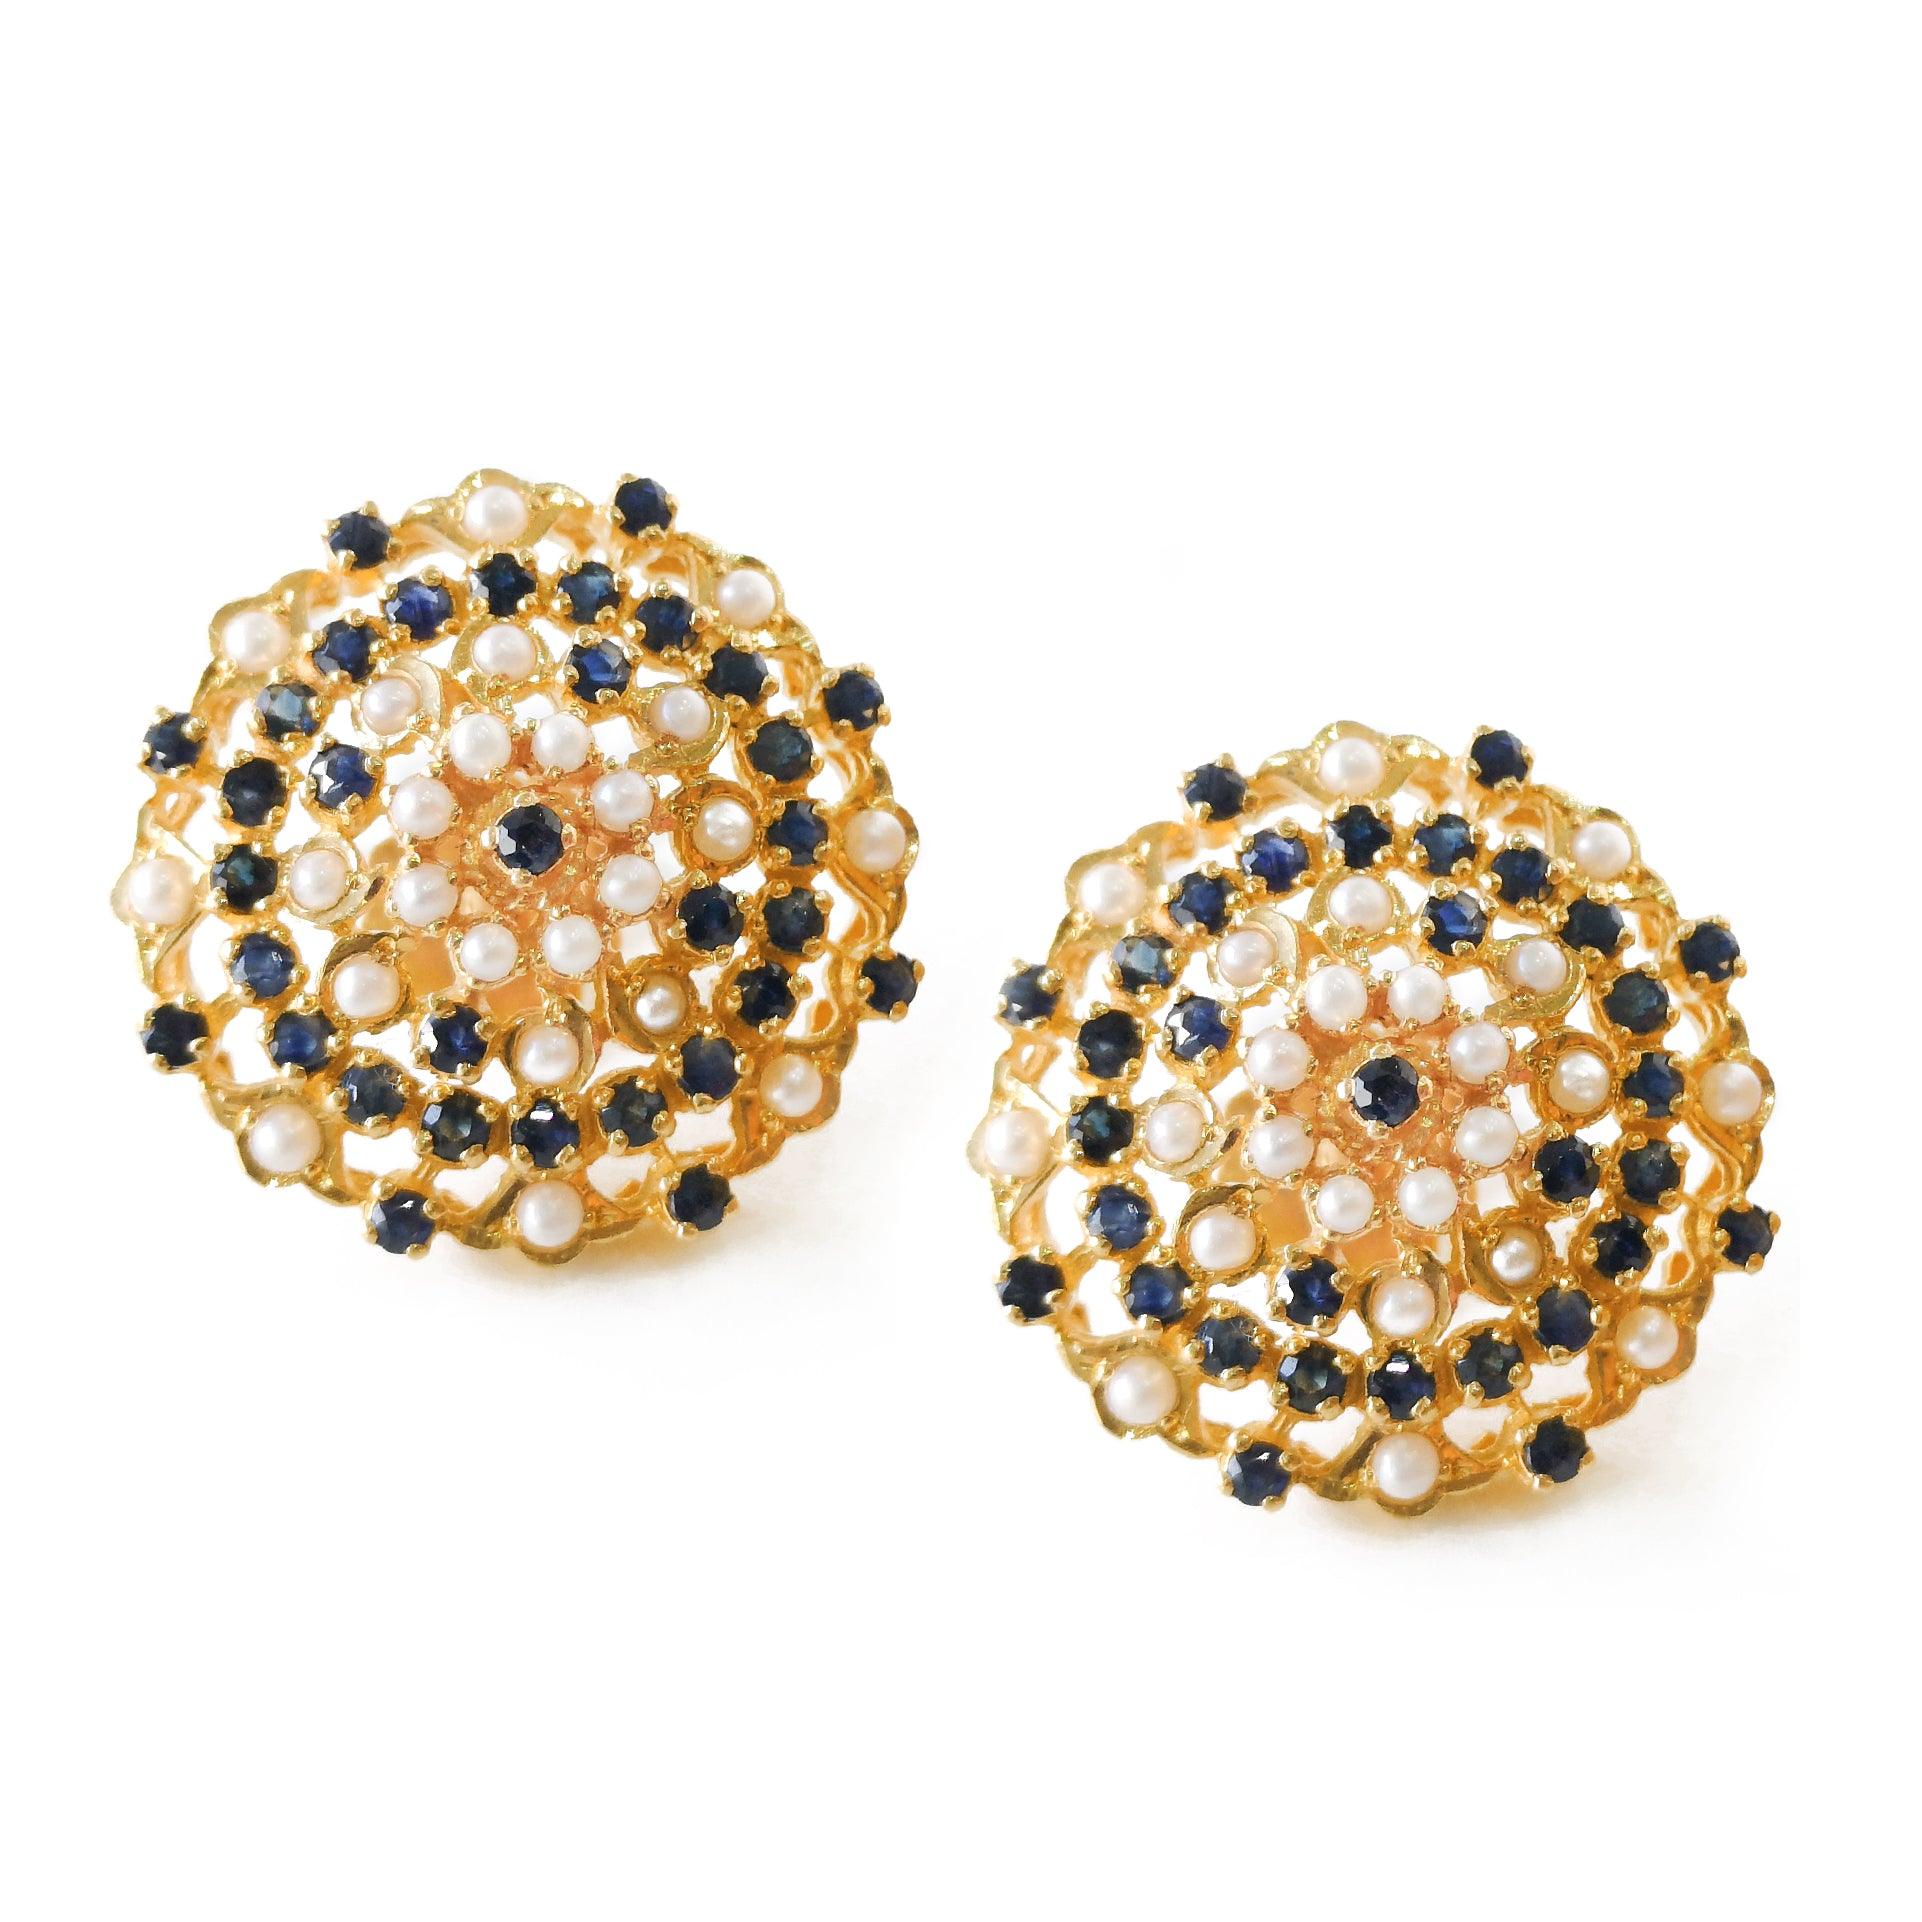 22ct Gold Stud Earrings set with Black Stones and Synthetic Pearls (17g) E-4172